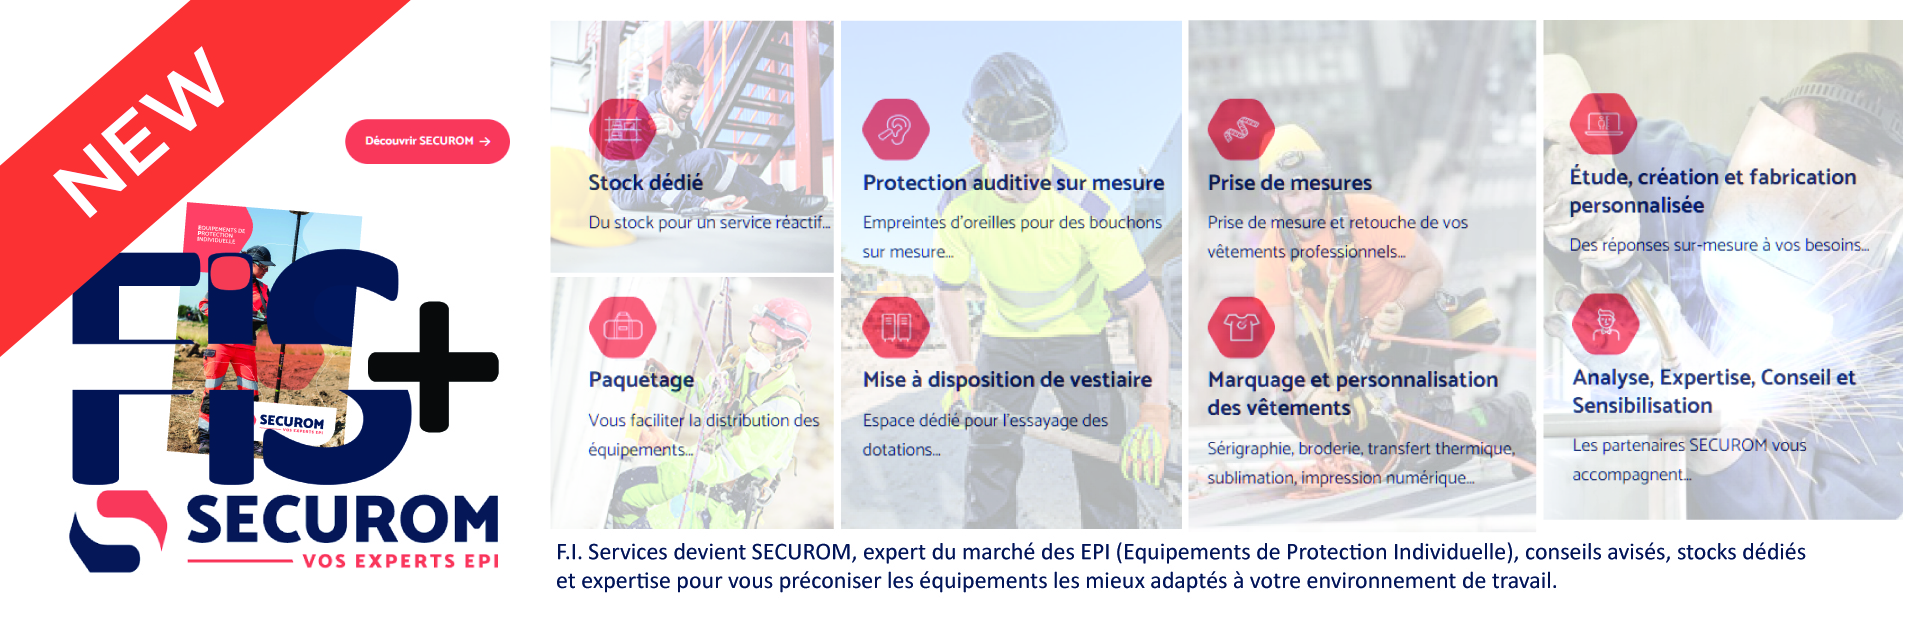 F.I. Services devient SECUROM